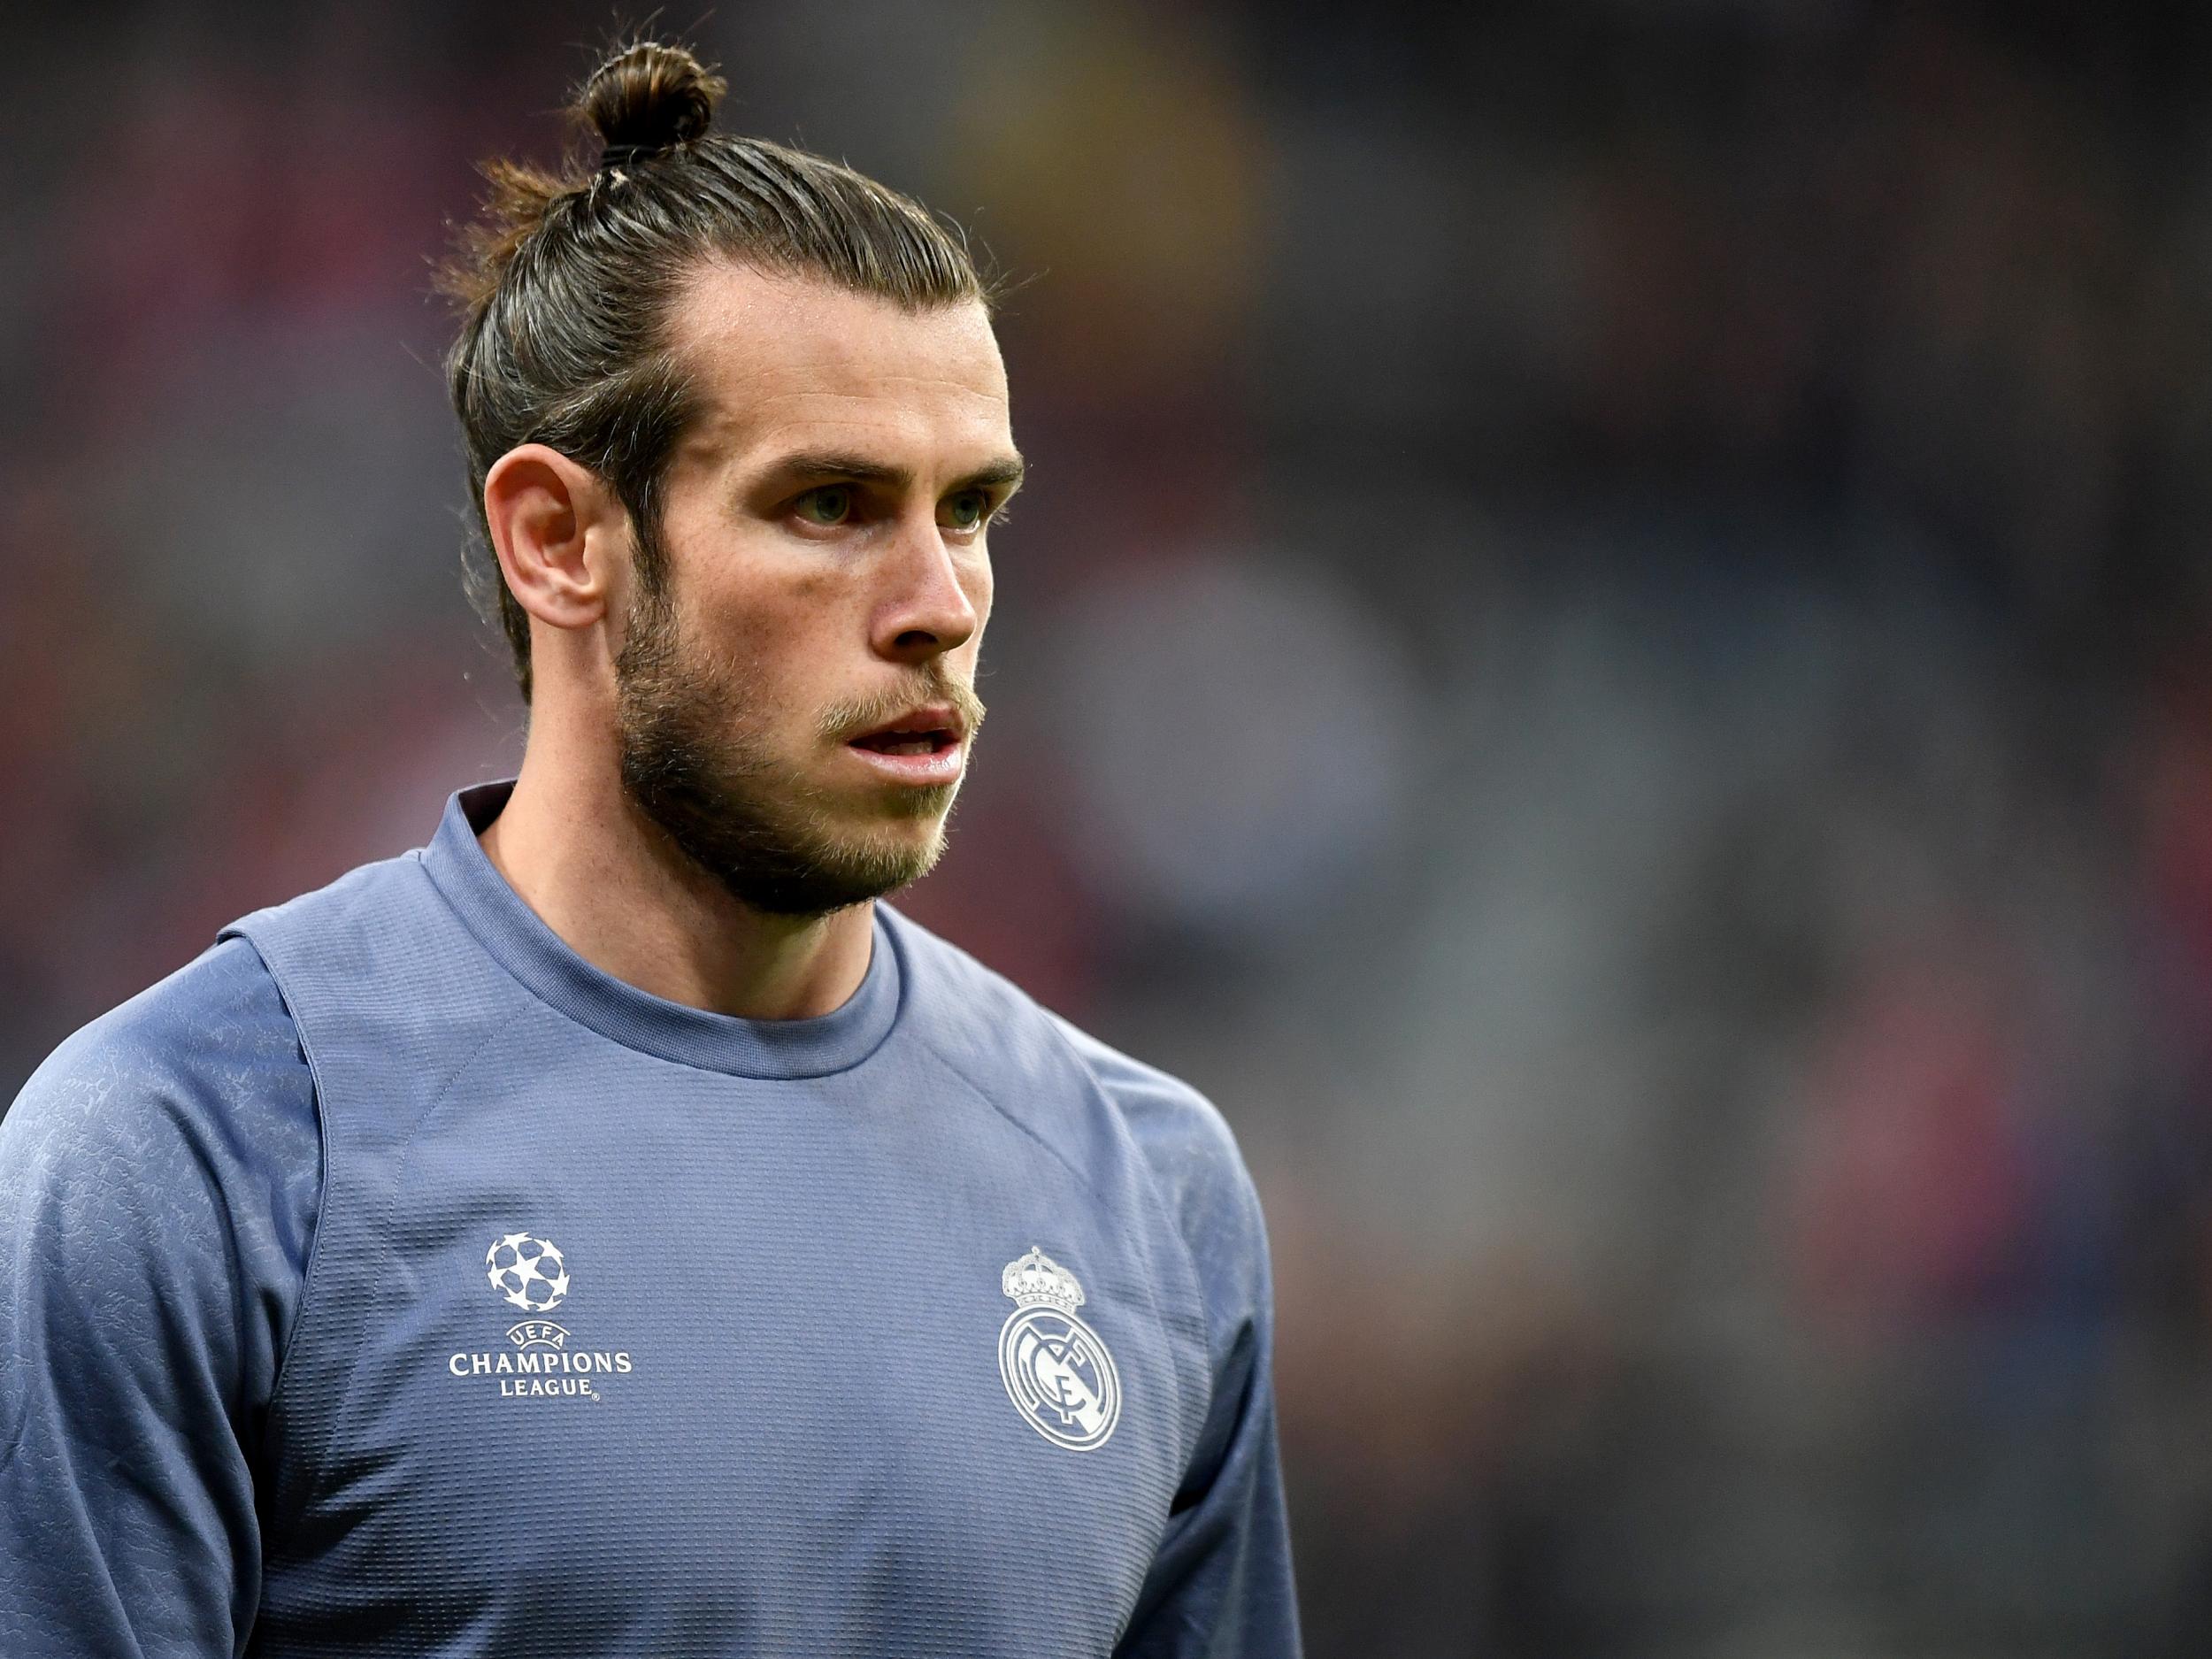 Bale had to be taken off after experiencing muscle tightness